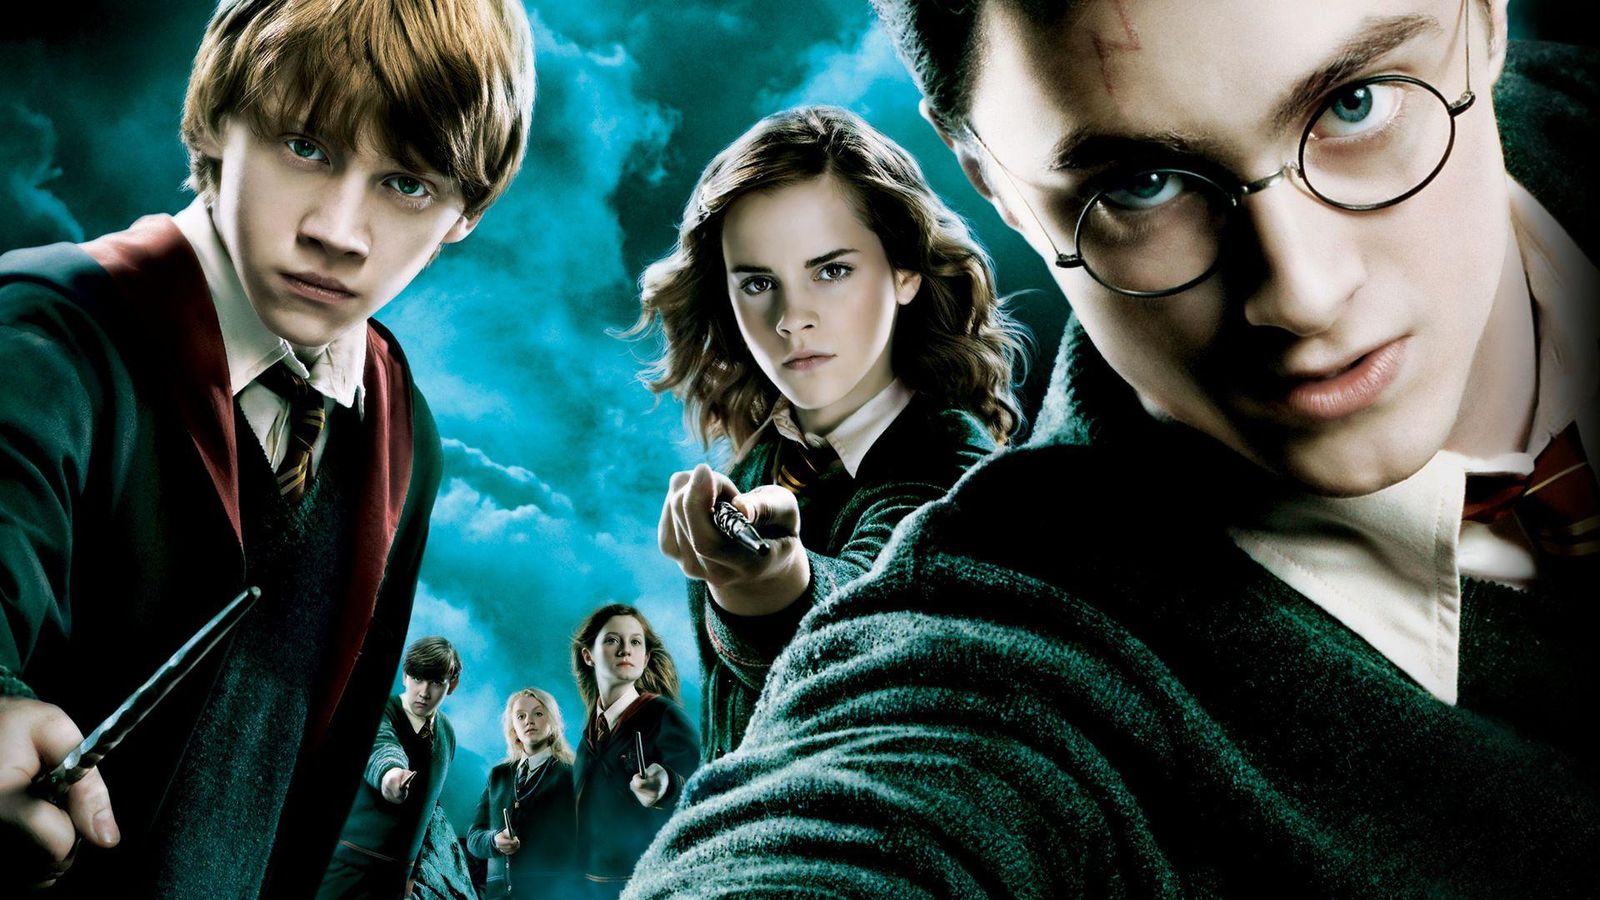 Harry, Hermoine, and Ron are holding wands with several of their friends behind them.